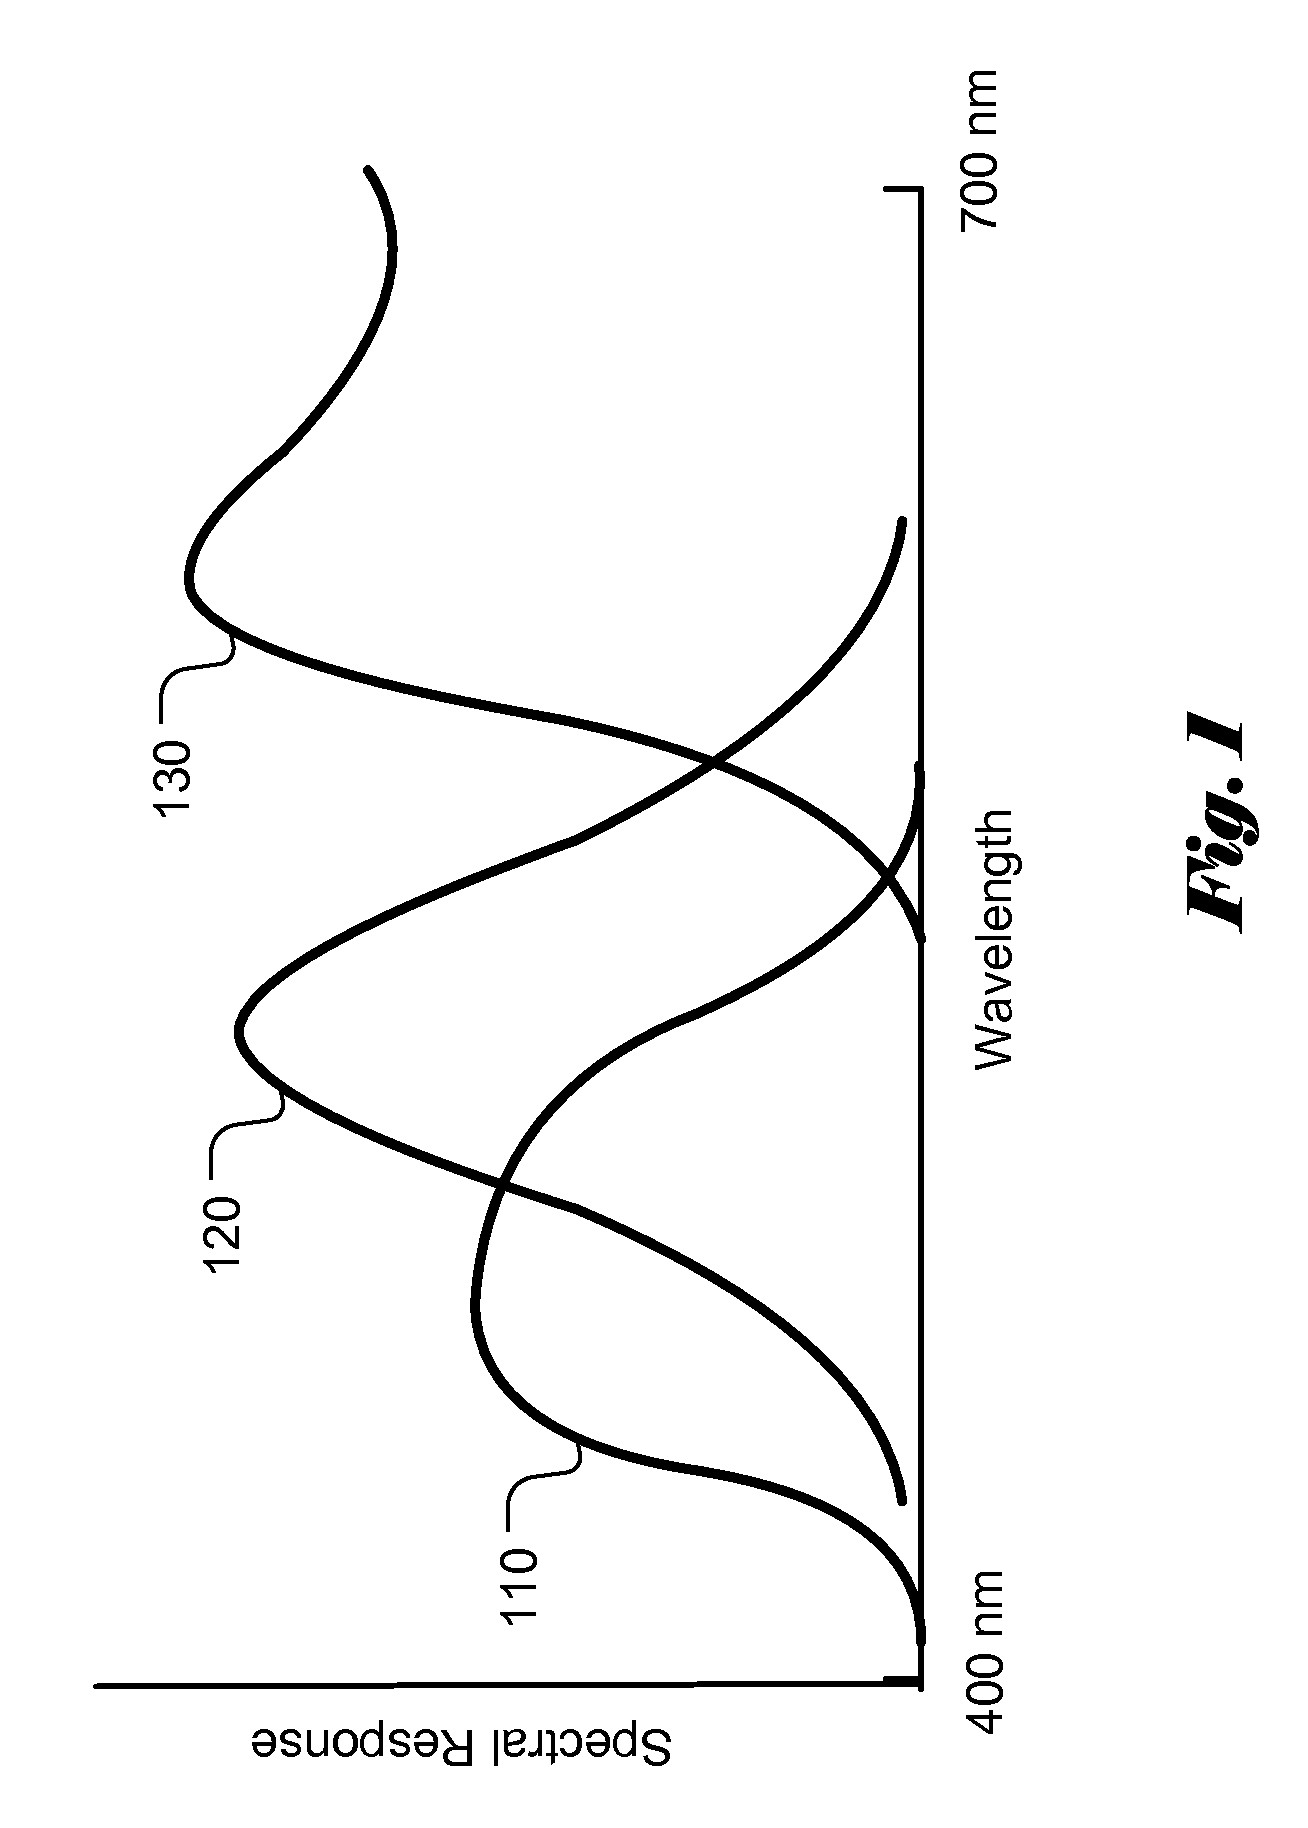 System and Method for Multiple Viewing-Window Display of Computed Spectral Images